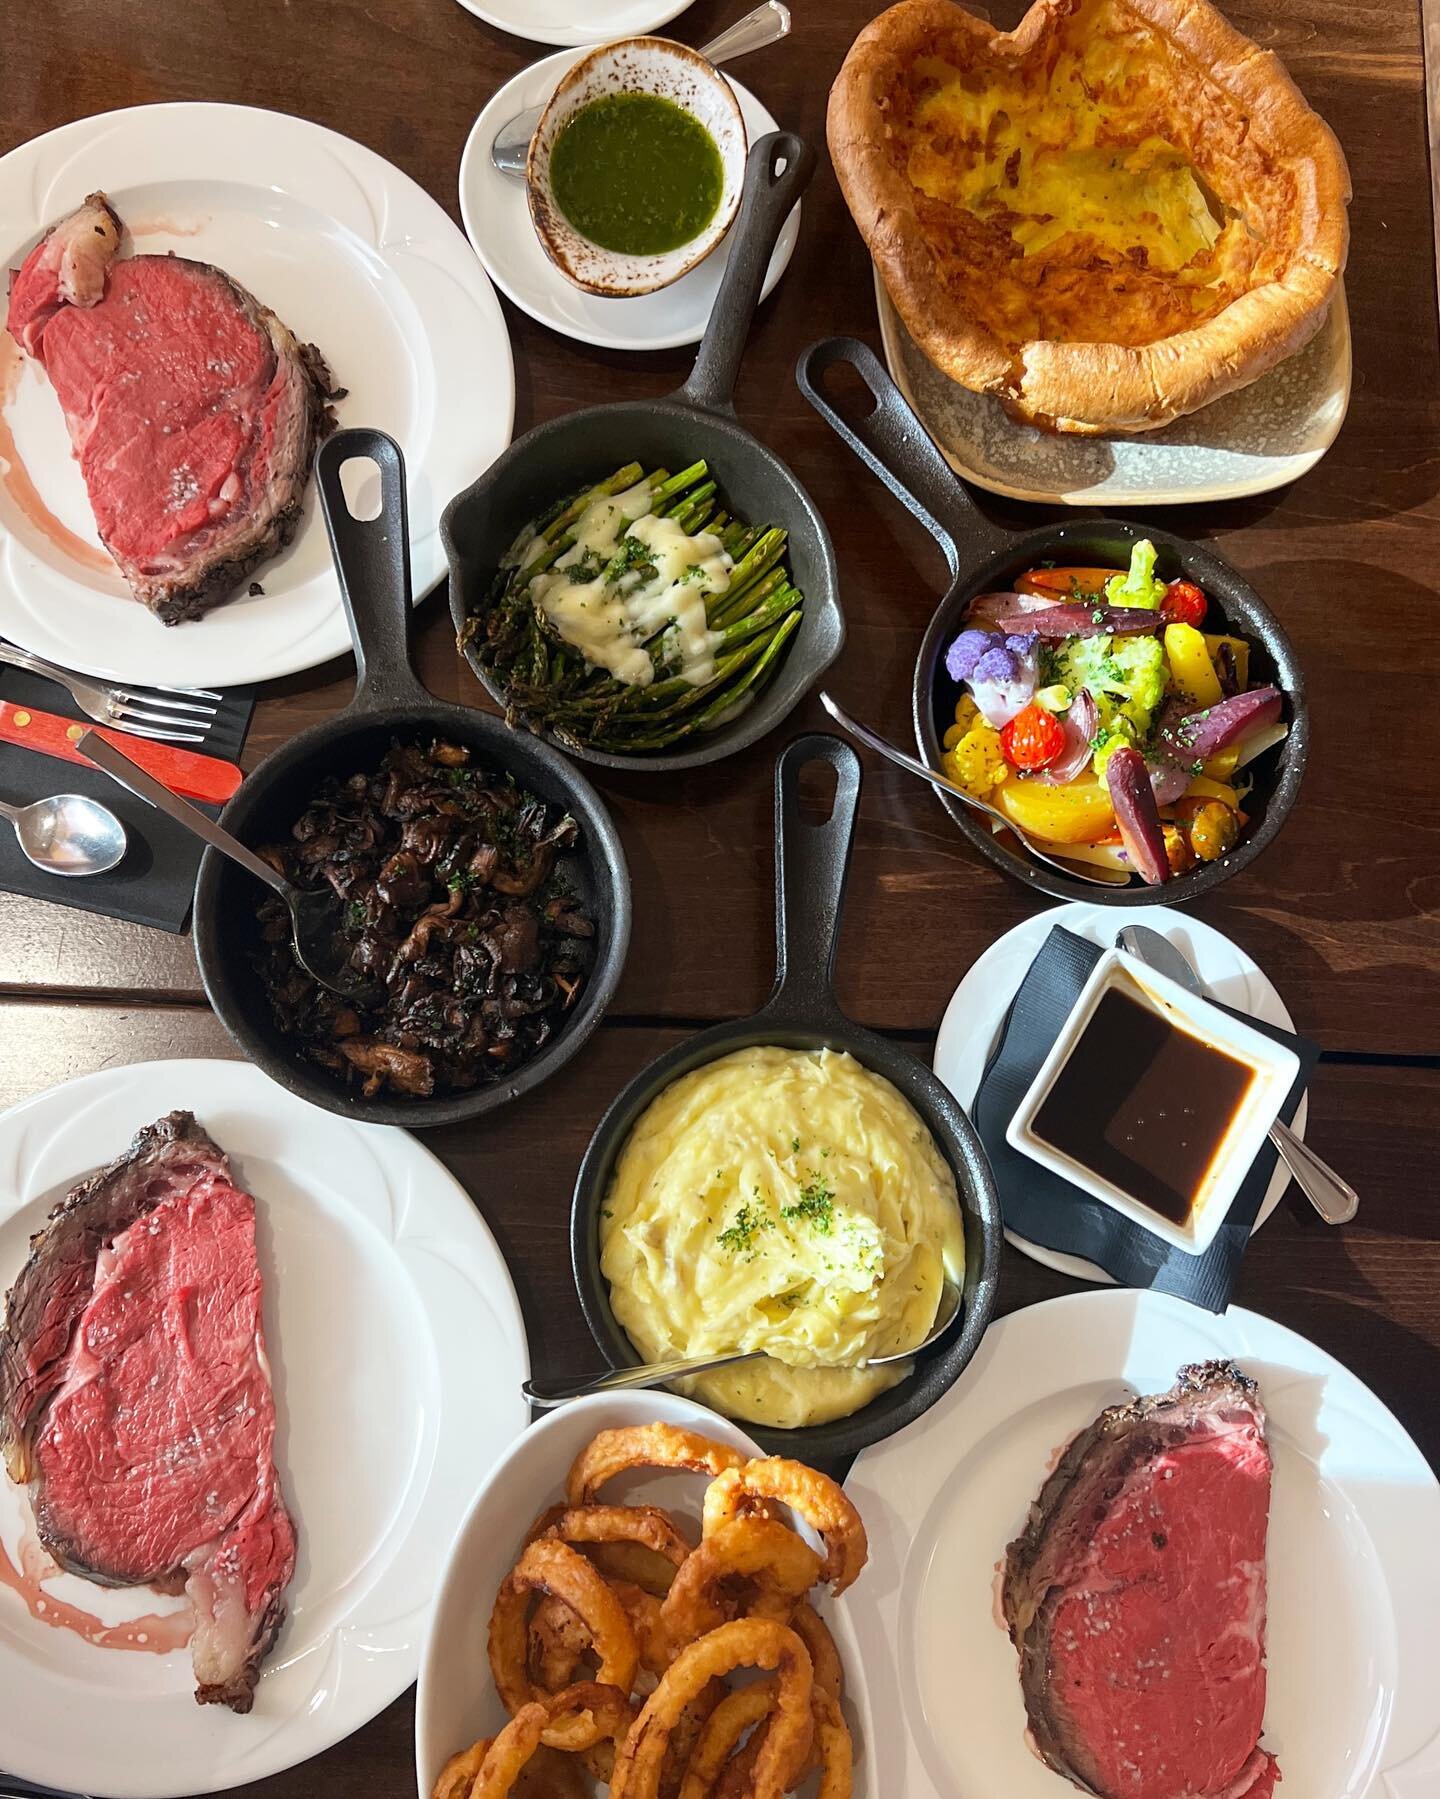 PRIME RIB SUNDAYS - RESERVATIONS NOW OPEN FOR MAY 7&hellip;.$35 per person &bull; 10oz. Prime Rib &bull; Chef&rsquo;s choice potato and two vegetables &bull; ADD ONS include GIANT yorkie, onion rings, salads and mushrooms! BOOK NOW ON OPENTABLE! #yeg